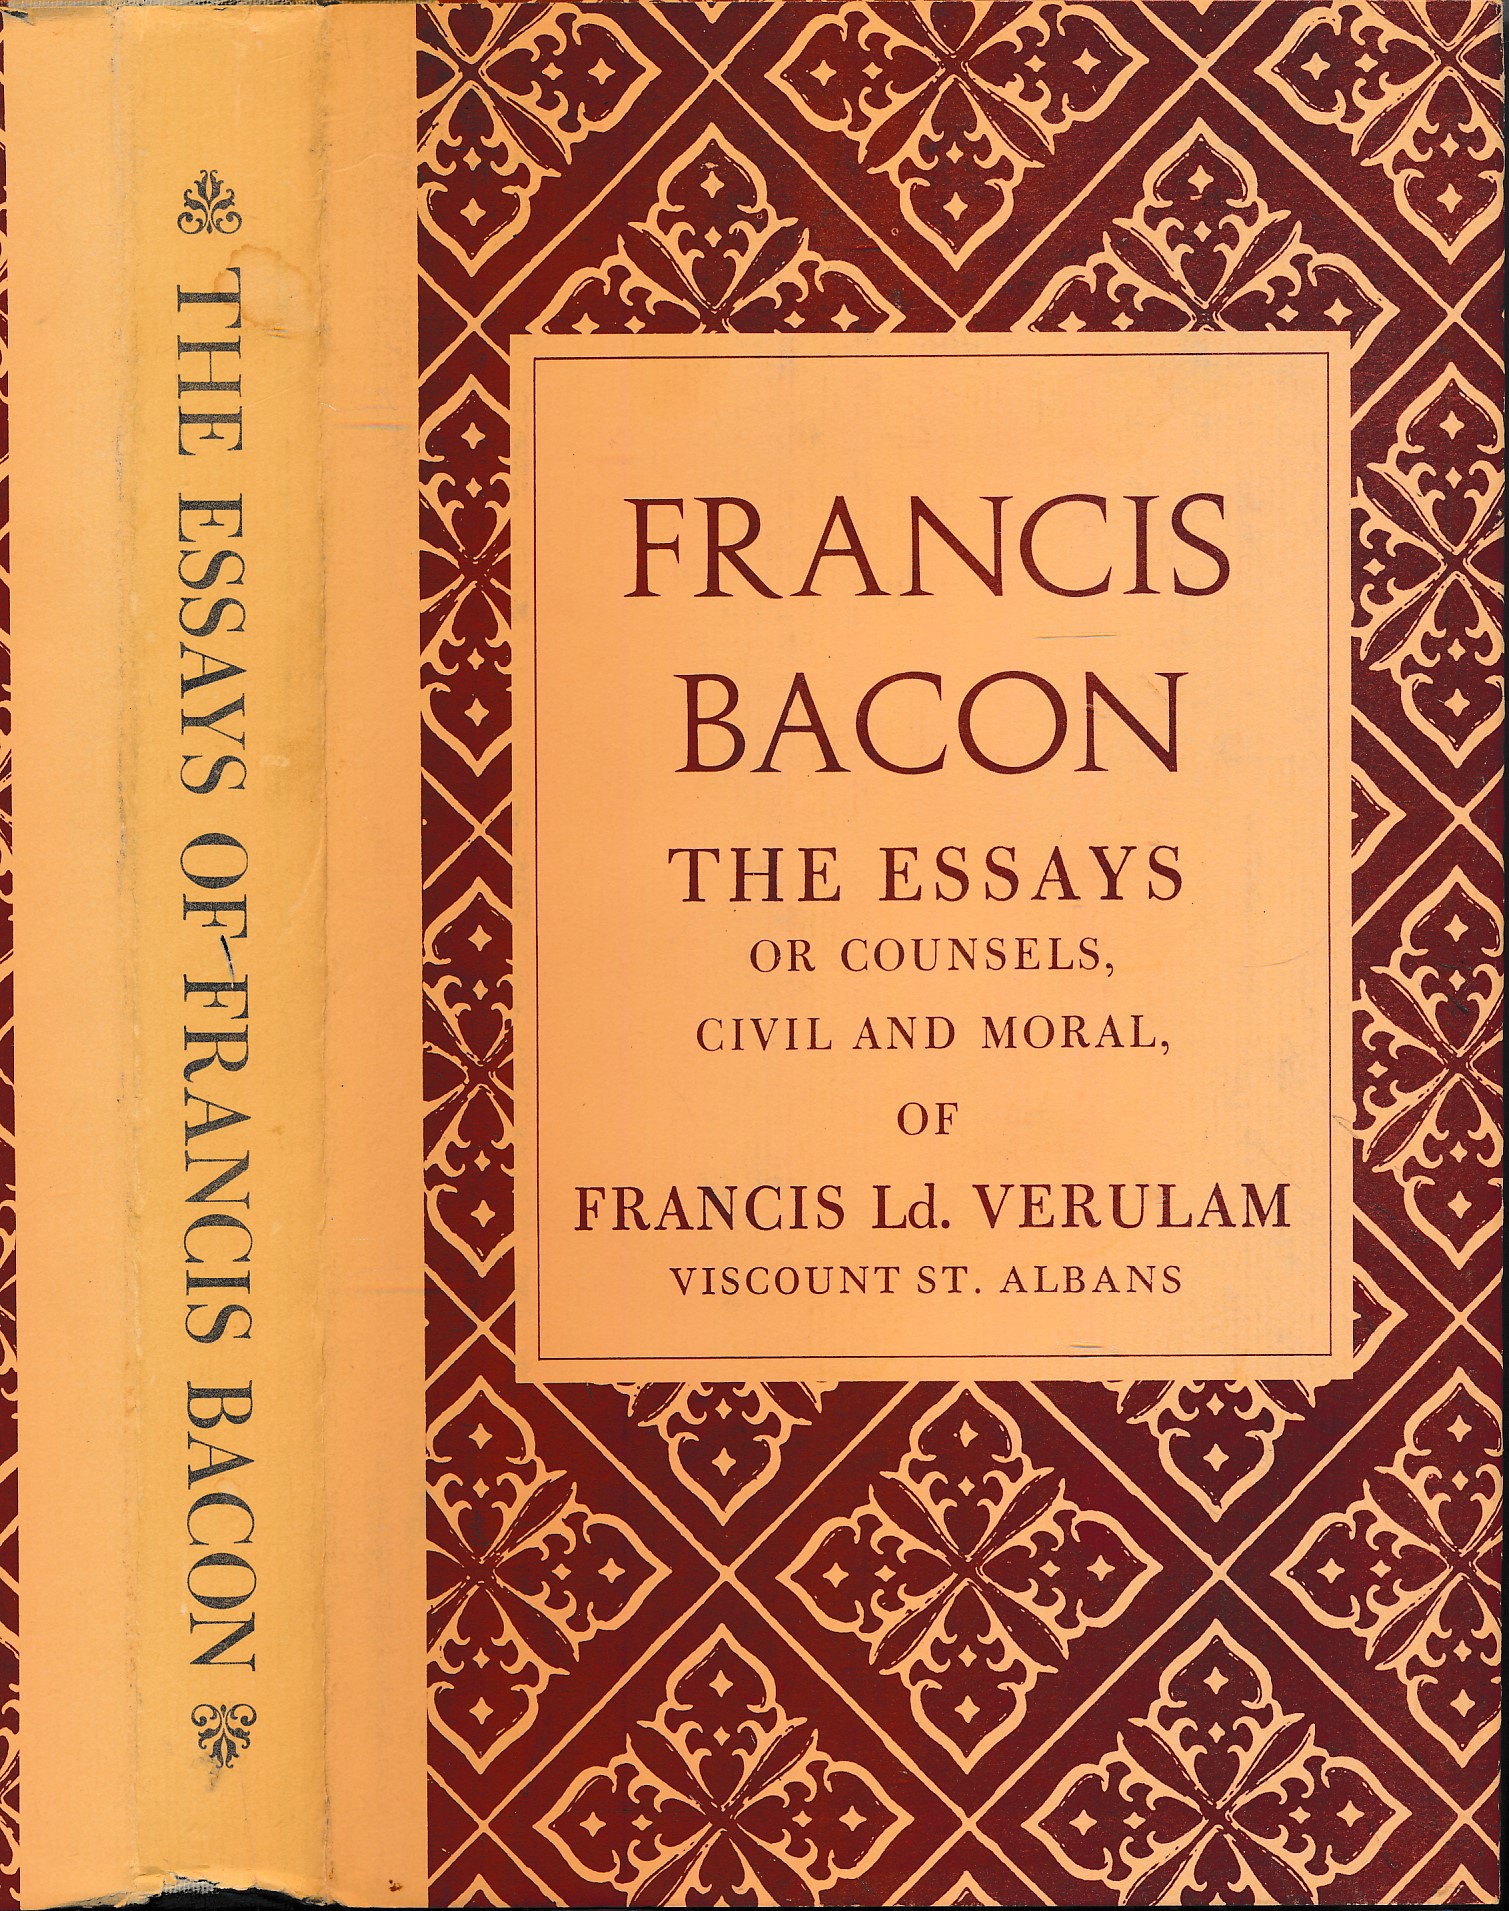 The Essayes or Councels, Civill and Moral, of Francis Ld. Verulam, Viscount St Alban. Pauper edition.